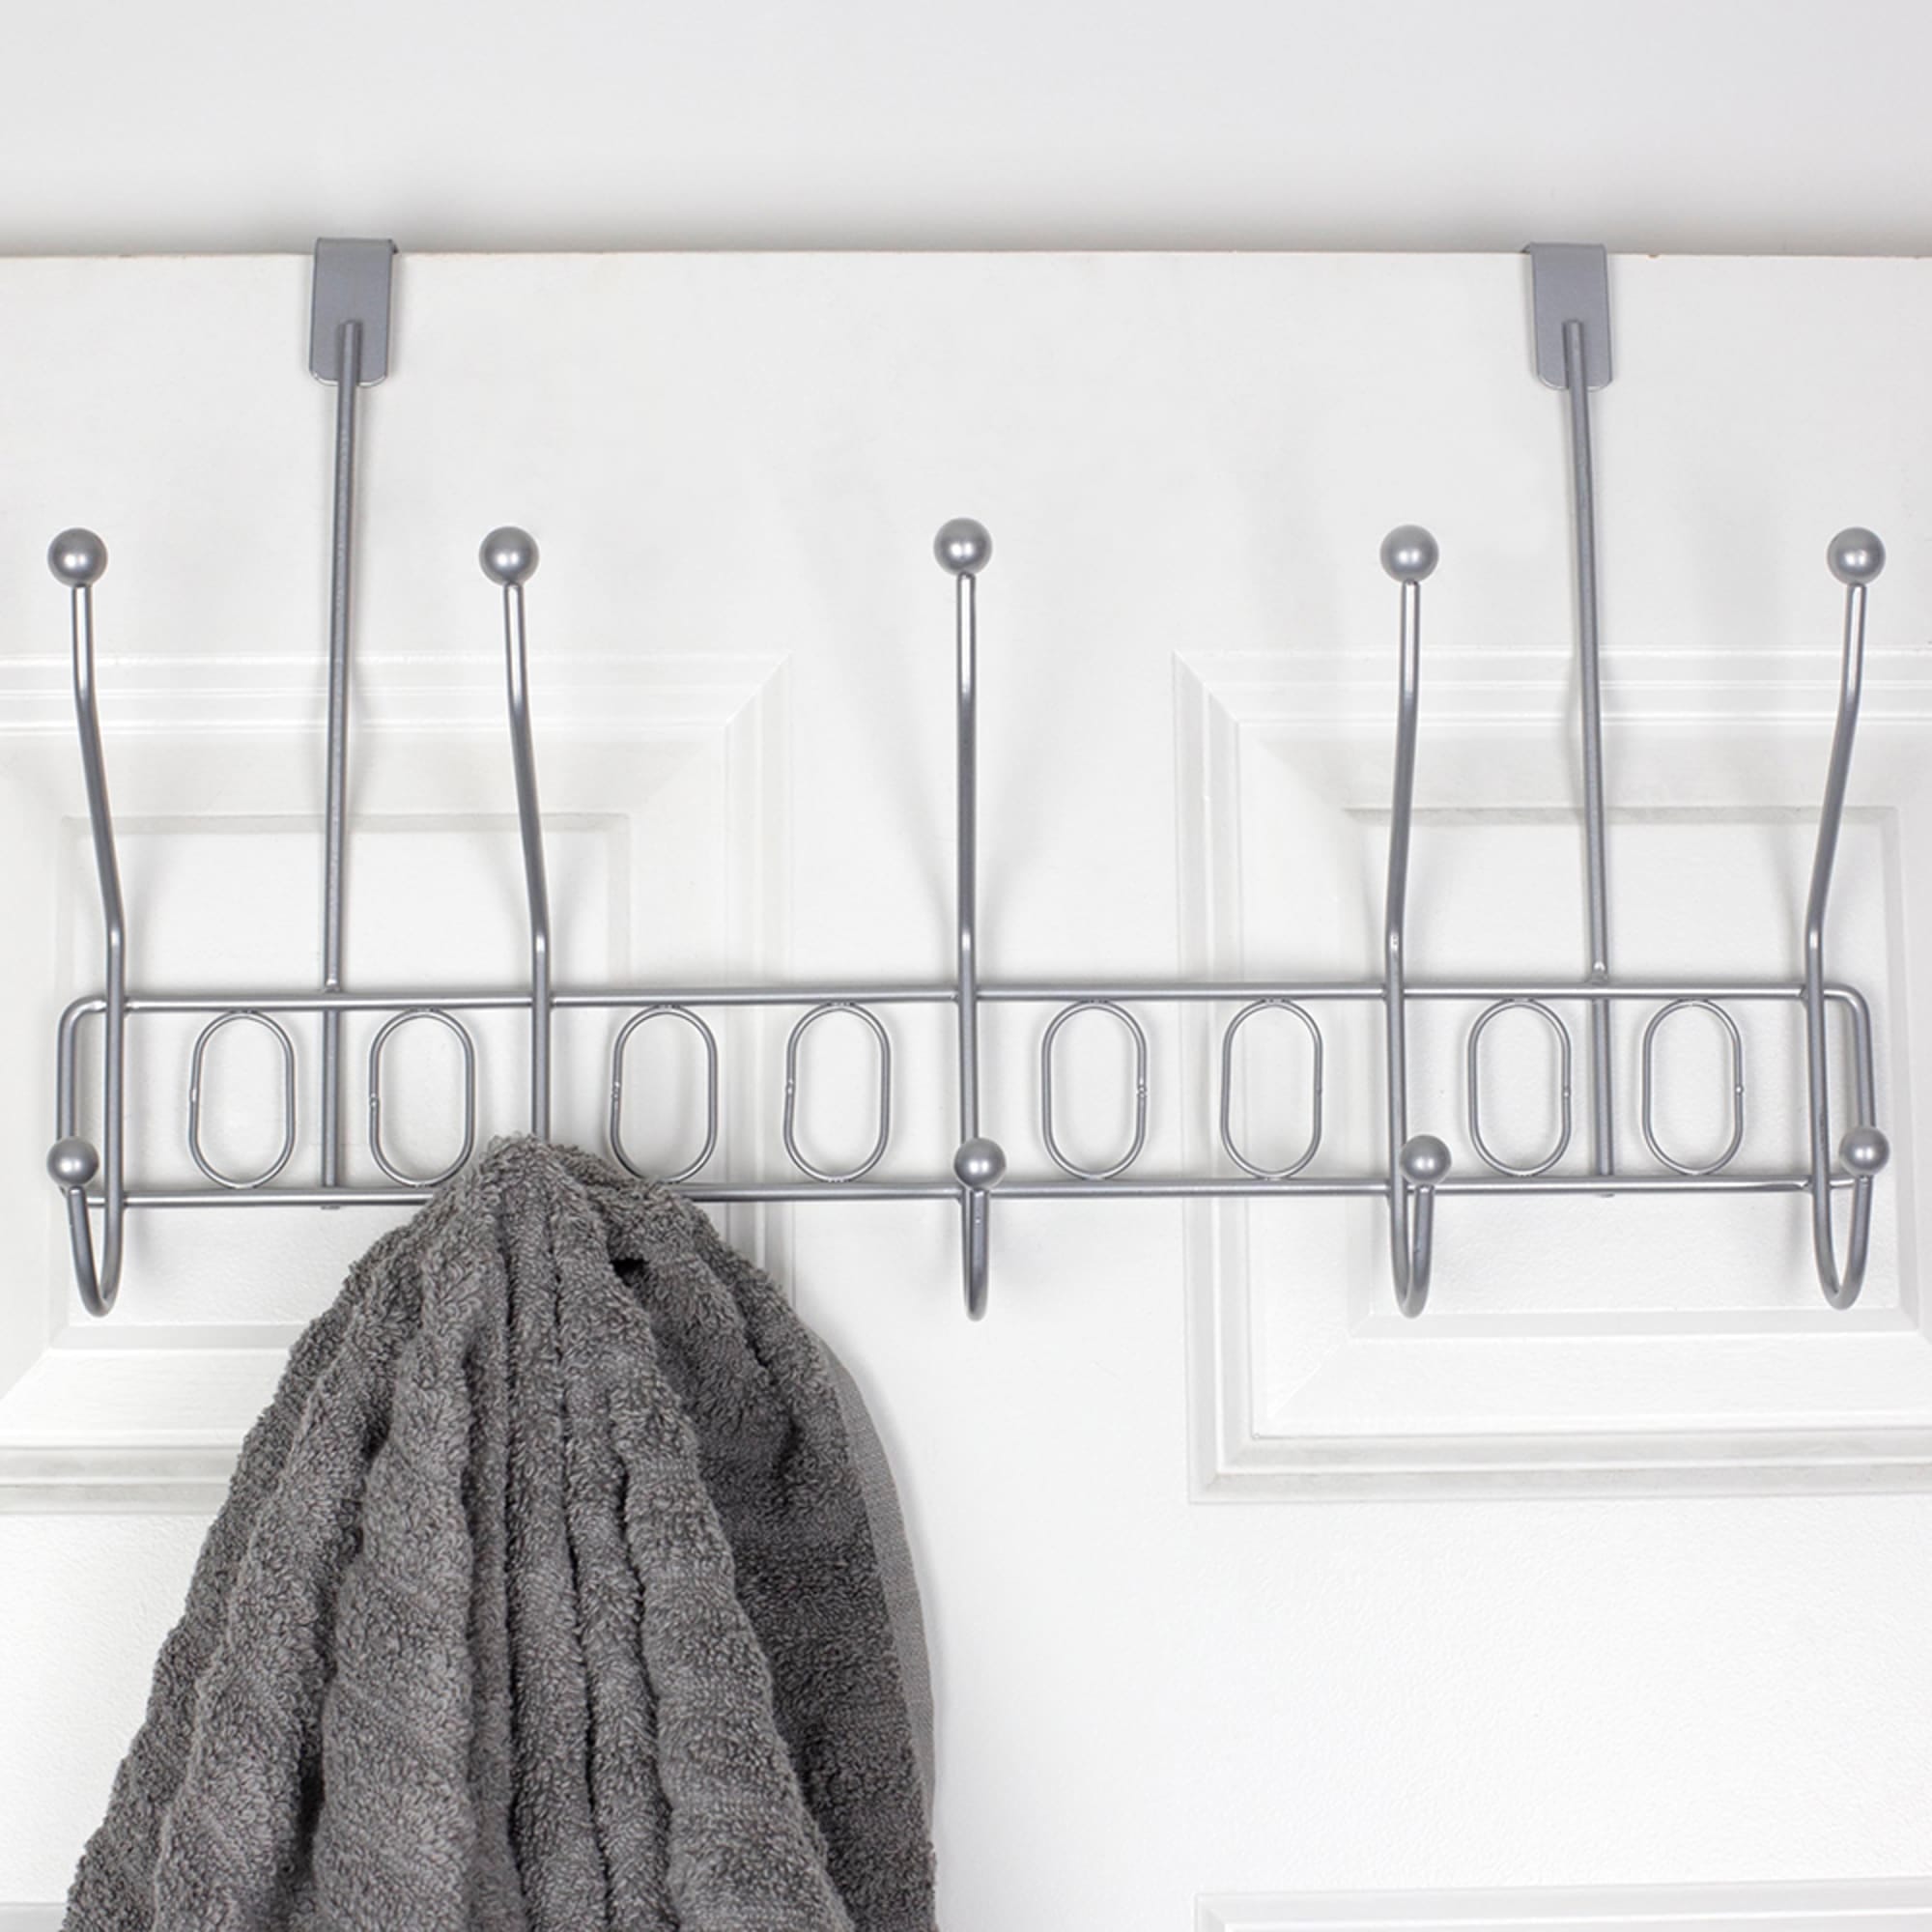 Home Basics Unity  5 Hook Over the Door Hanging Rack, Silver $6.00 EACH, CASE PACK OF 12